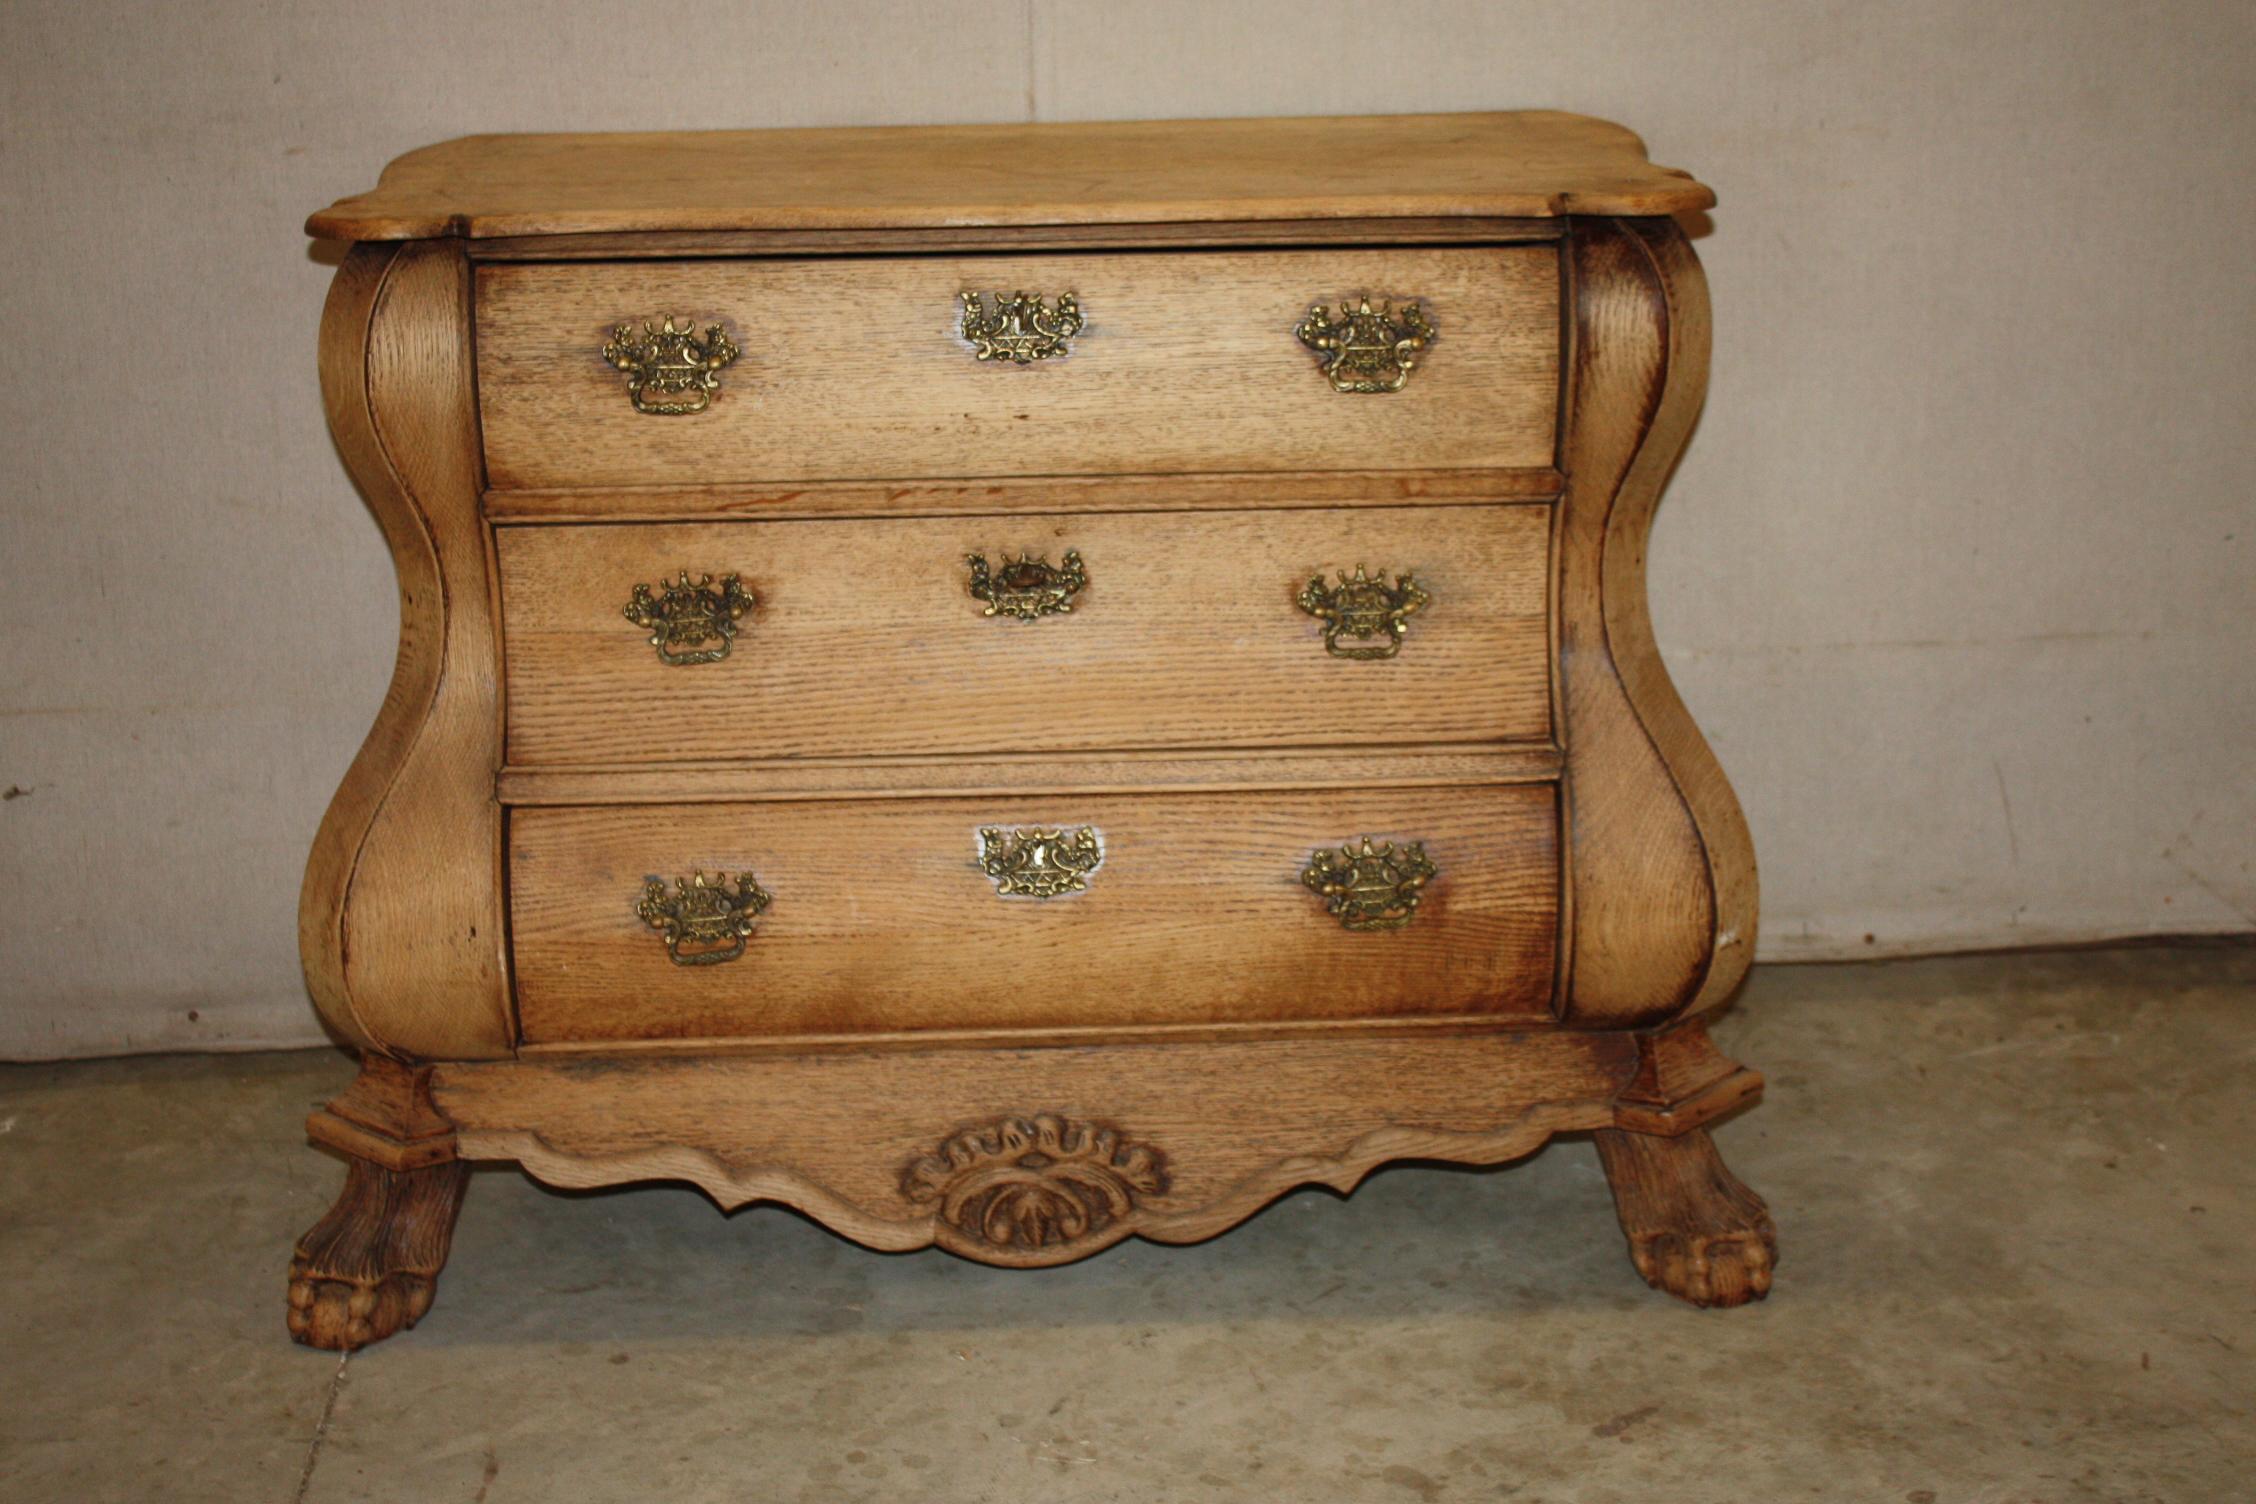 This is a very nice bleached oak Dutch Bombay commode. It dates to the early 1900s. It has ball and claw feet. It has a very nice look. The drawers work flawlessly. It is in great shape for its age.